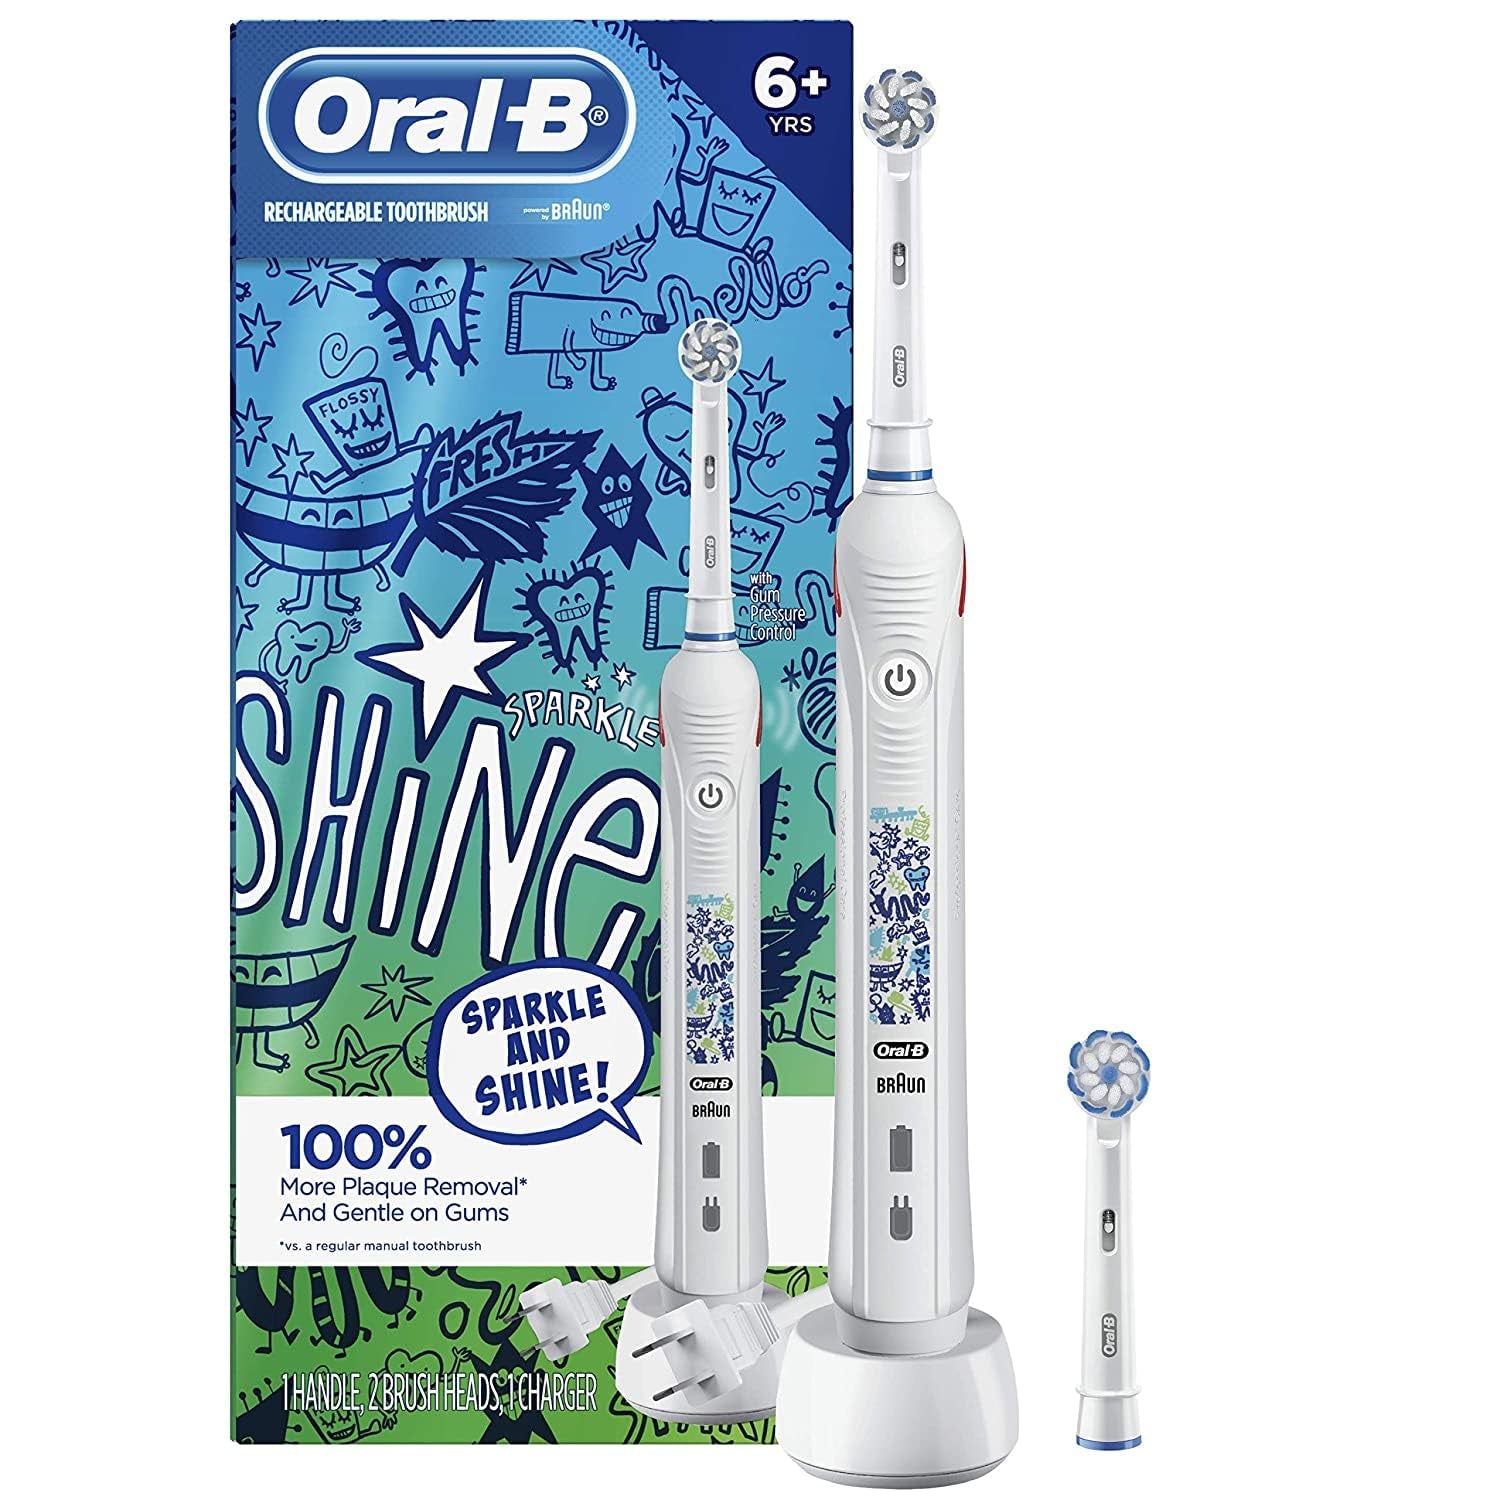 Kids Electric Toothbrush with Coaching Pressure Sensor and Timer, Rechargeable Toothbrush with (2) Brush Heads, Sparkle & Shine